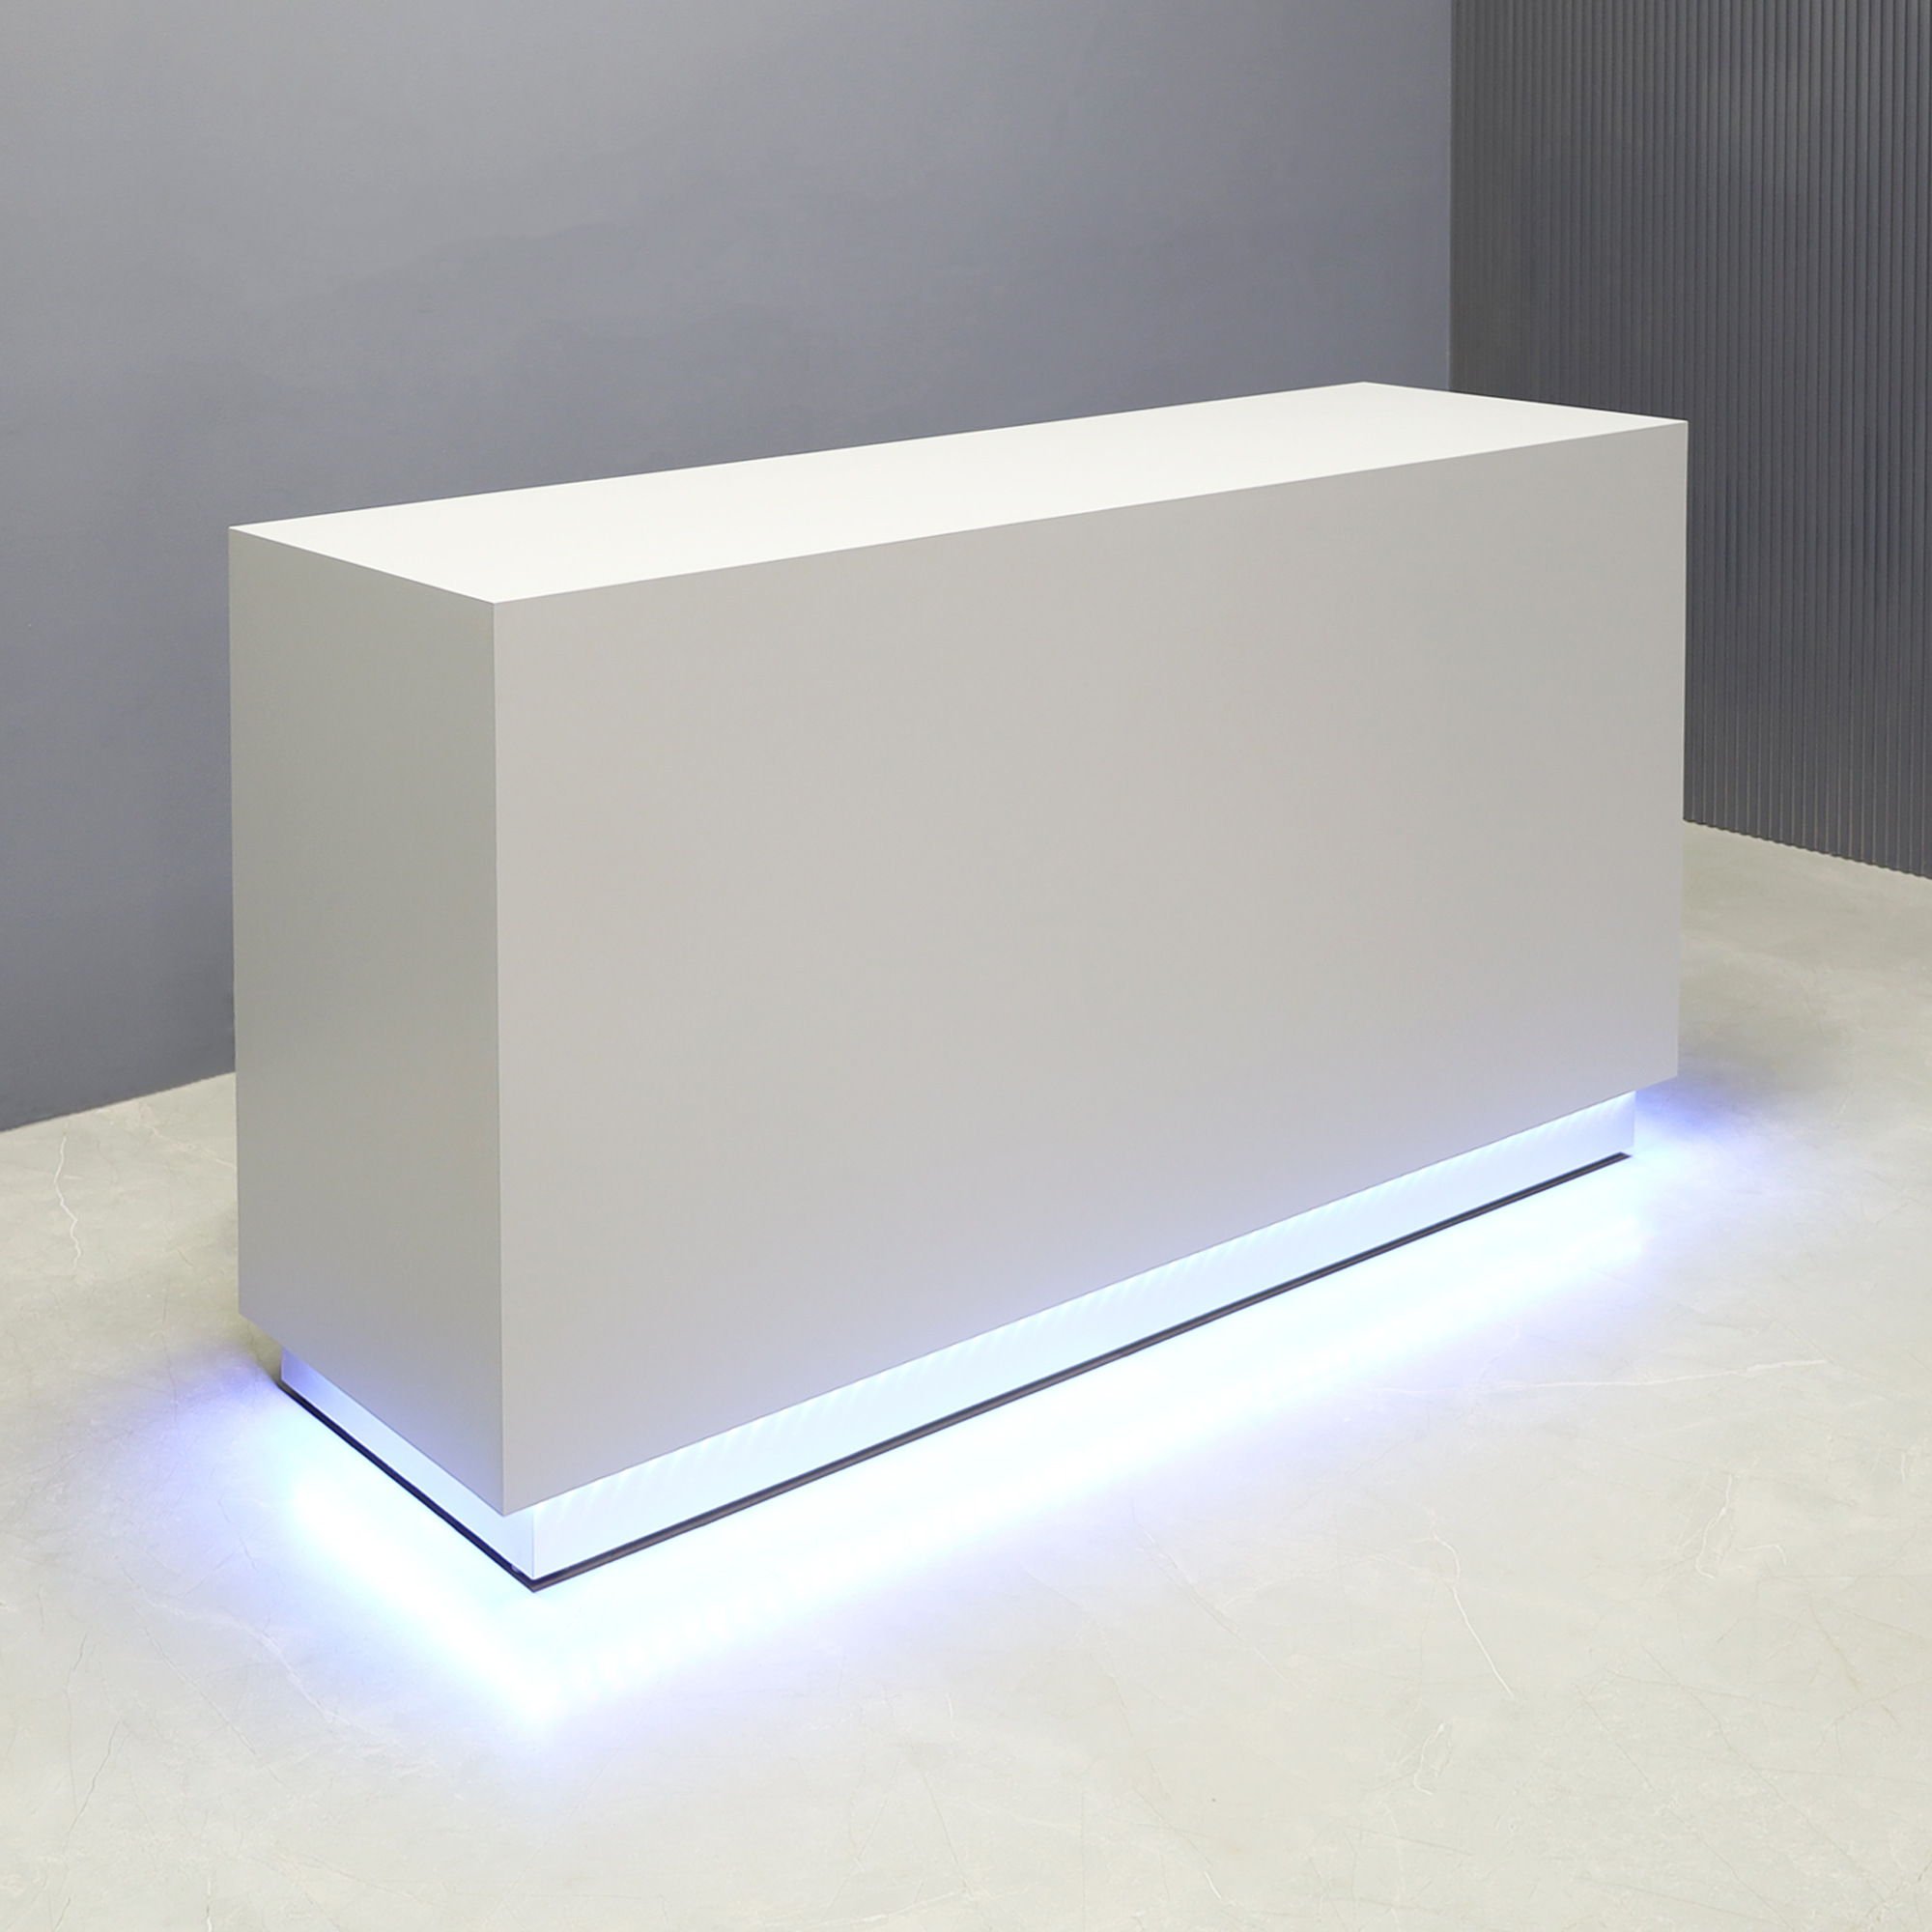 72-inch Houston Custom Reception Desk in folkstone gray matte laminate main desk and brushed aluminum toe-kick, with white LED, shown here.